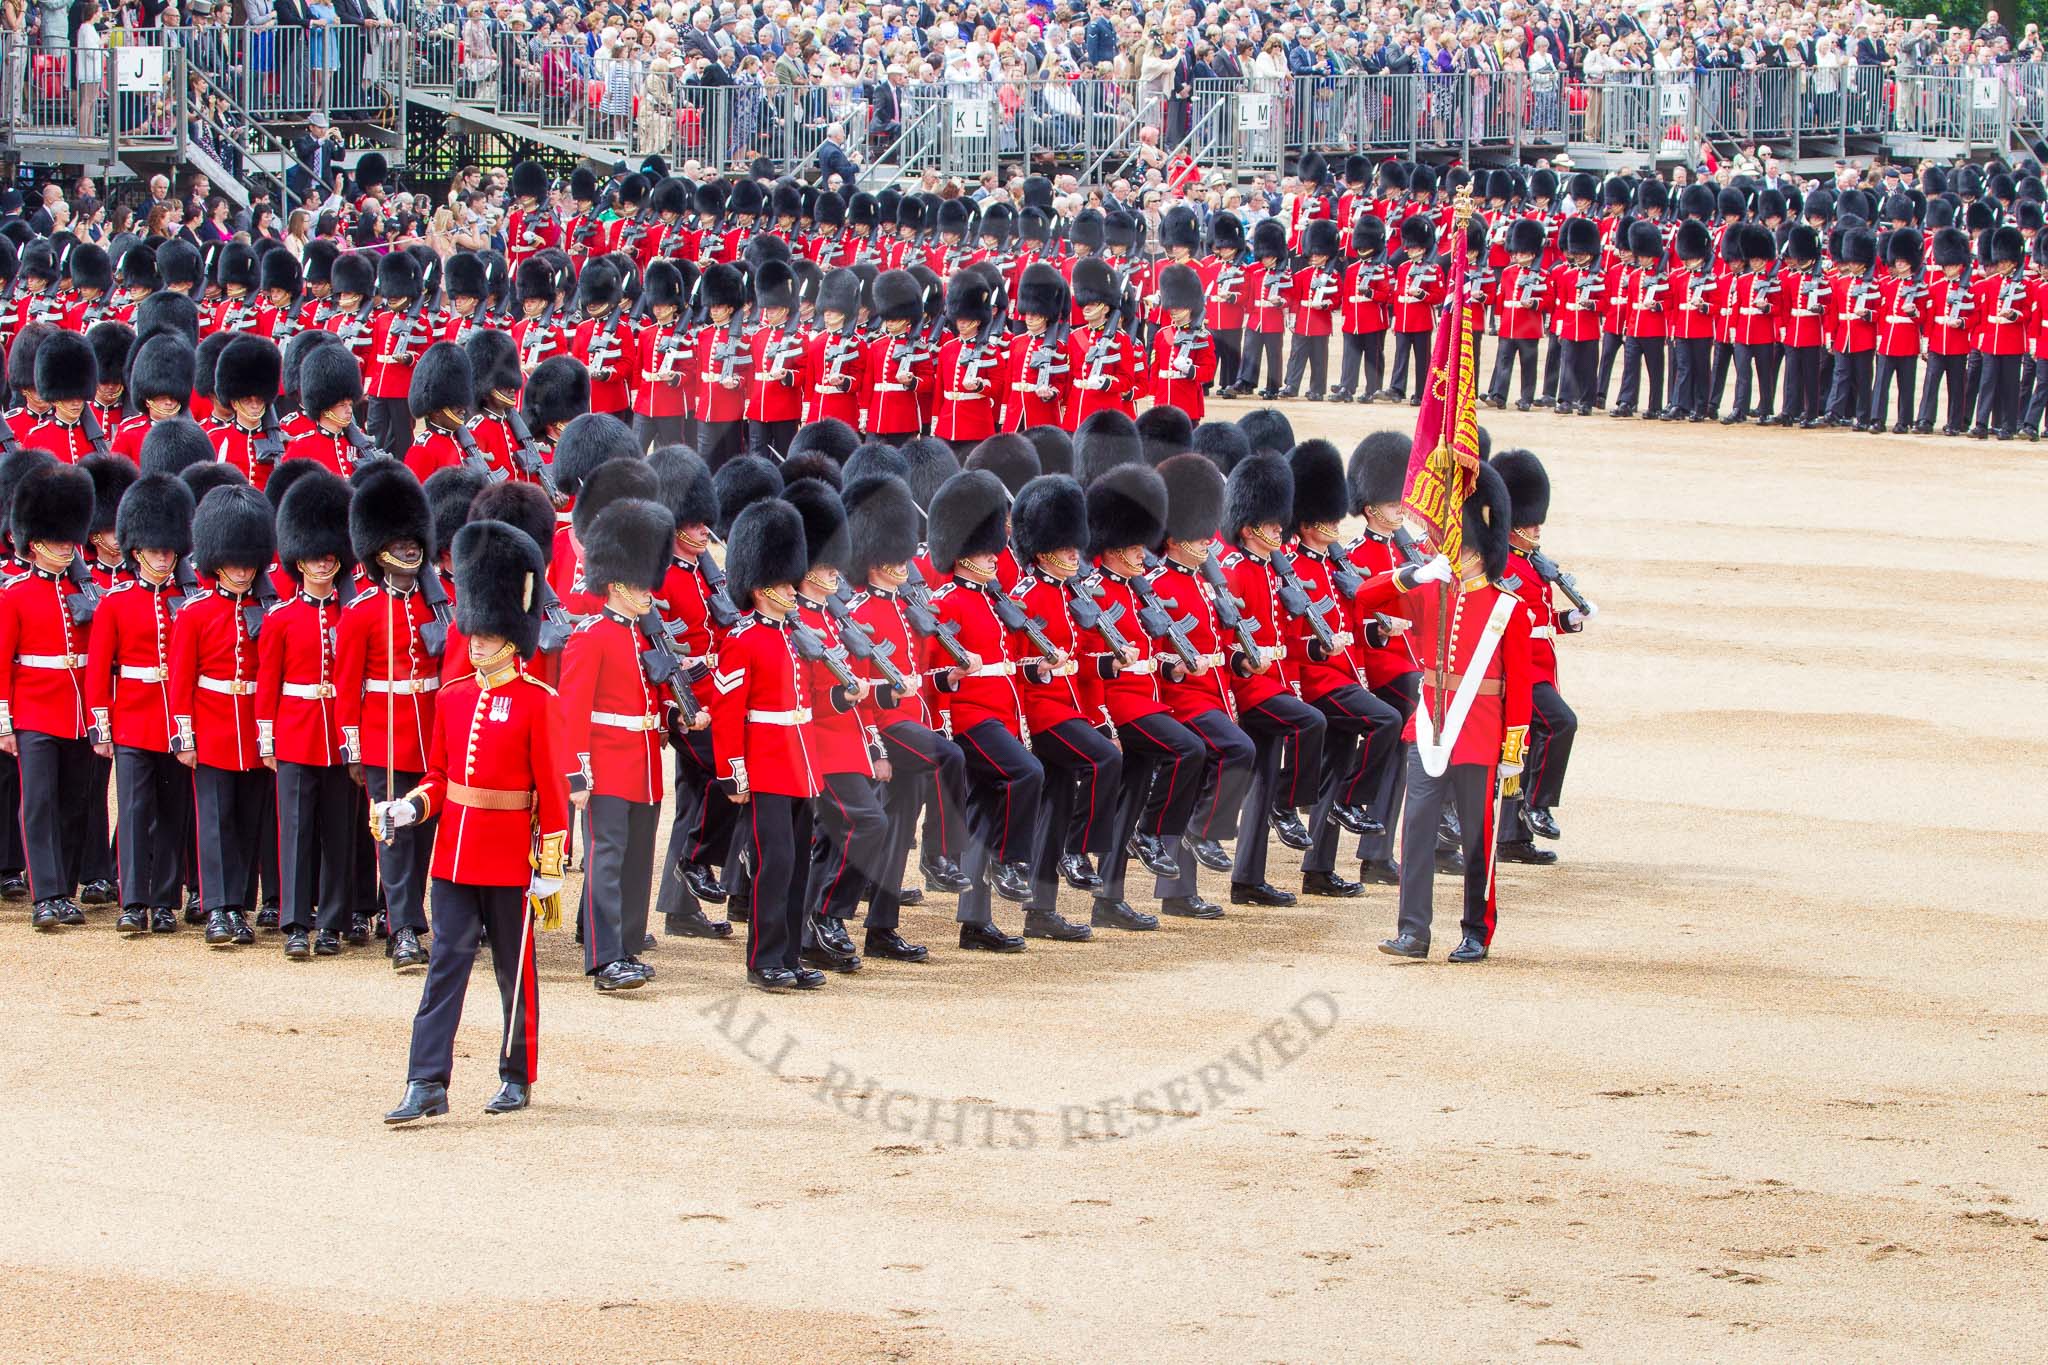 Trooping the Colour 2014.
Horse Guards Parade, Westminster,
London SW1A,

United Kingdom,
on 14 June 2014 at 11:36, image #617